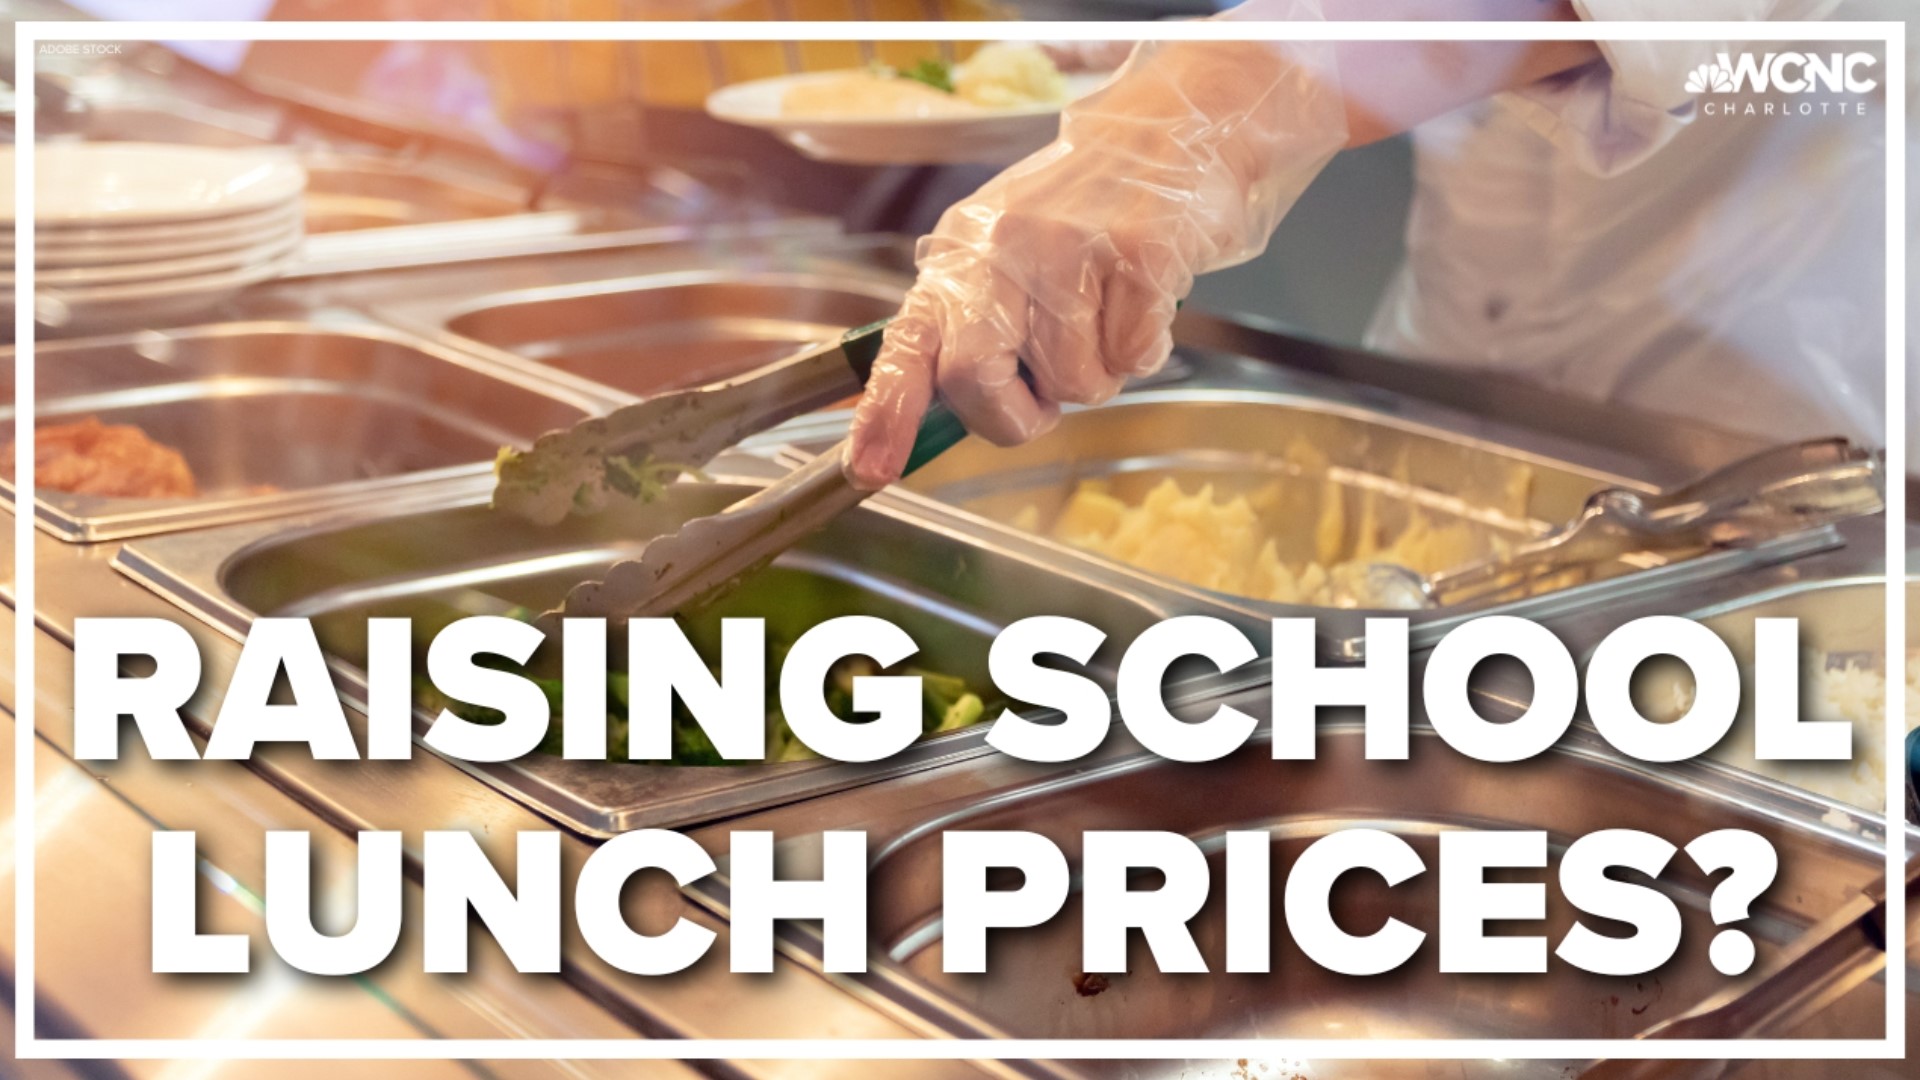 Iredell-Statesville Schools is now considering raising the price of school lunches by 50 cents next year.